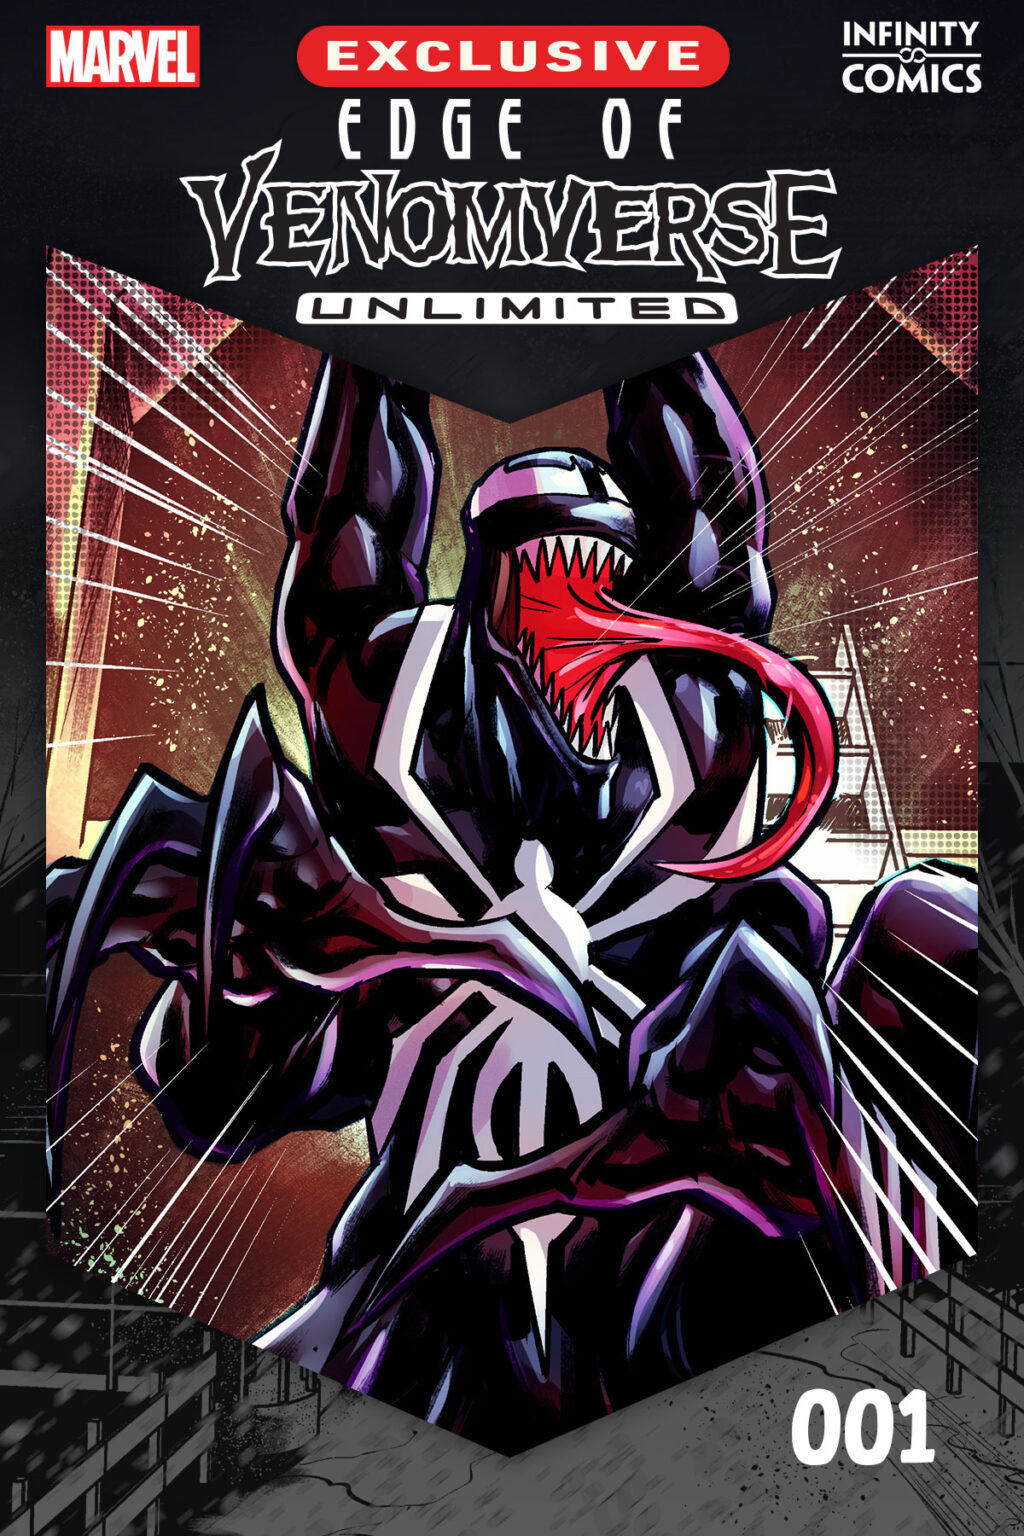 SUMMER OF SYMBIOTES TAKES OVER C2E2 WITH NEW SERIES ANNOUNCEMENTS